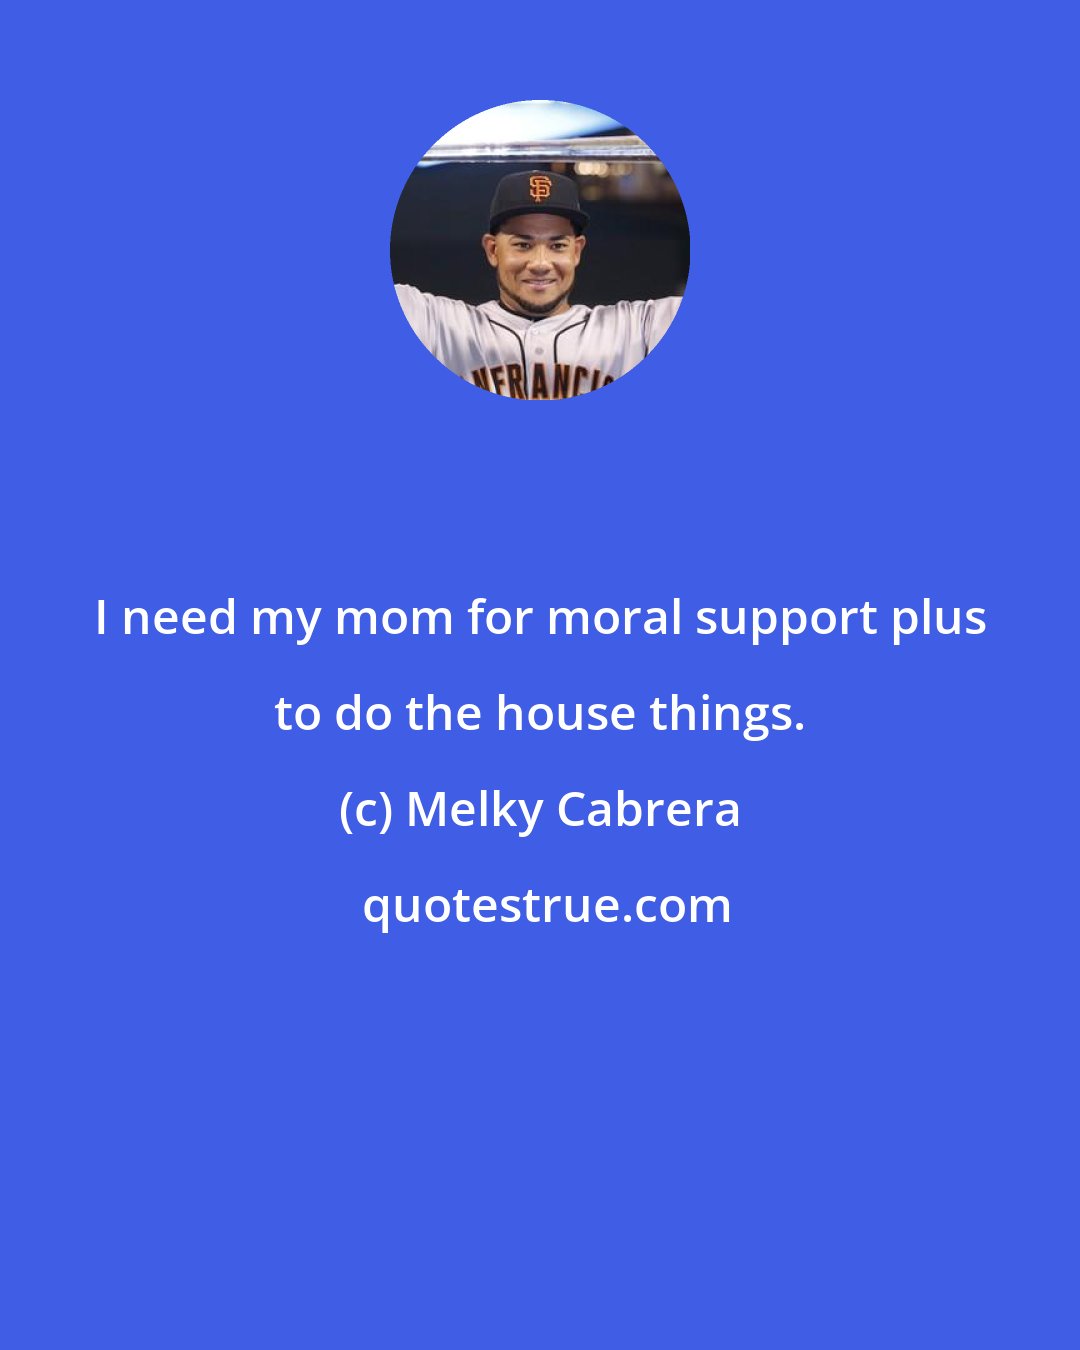 Melky Cabrera: I need my mom for moral support plus to do the house things.